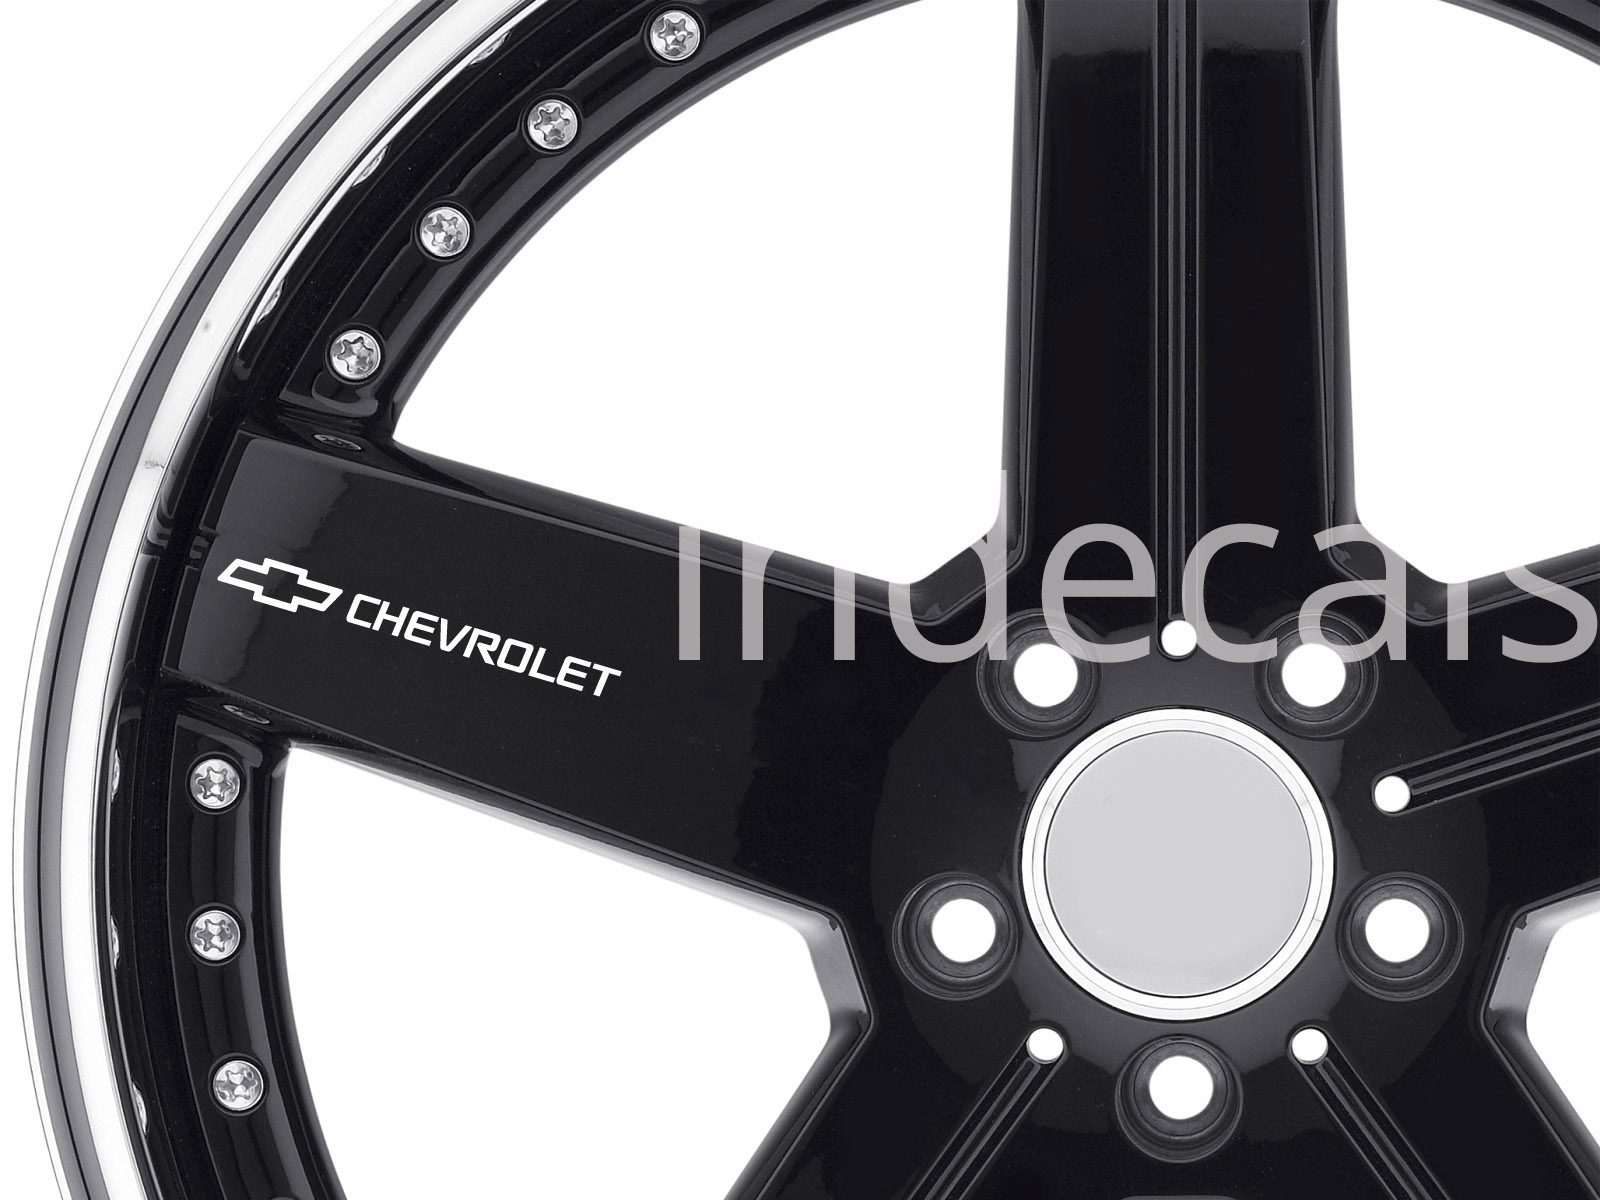 6 x Chevrolet Stickers for Wheels - White